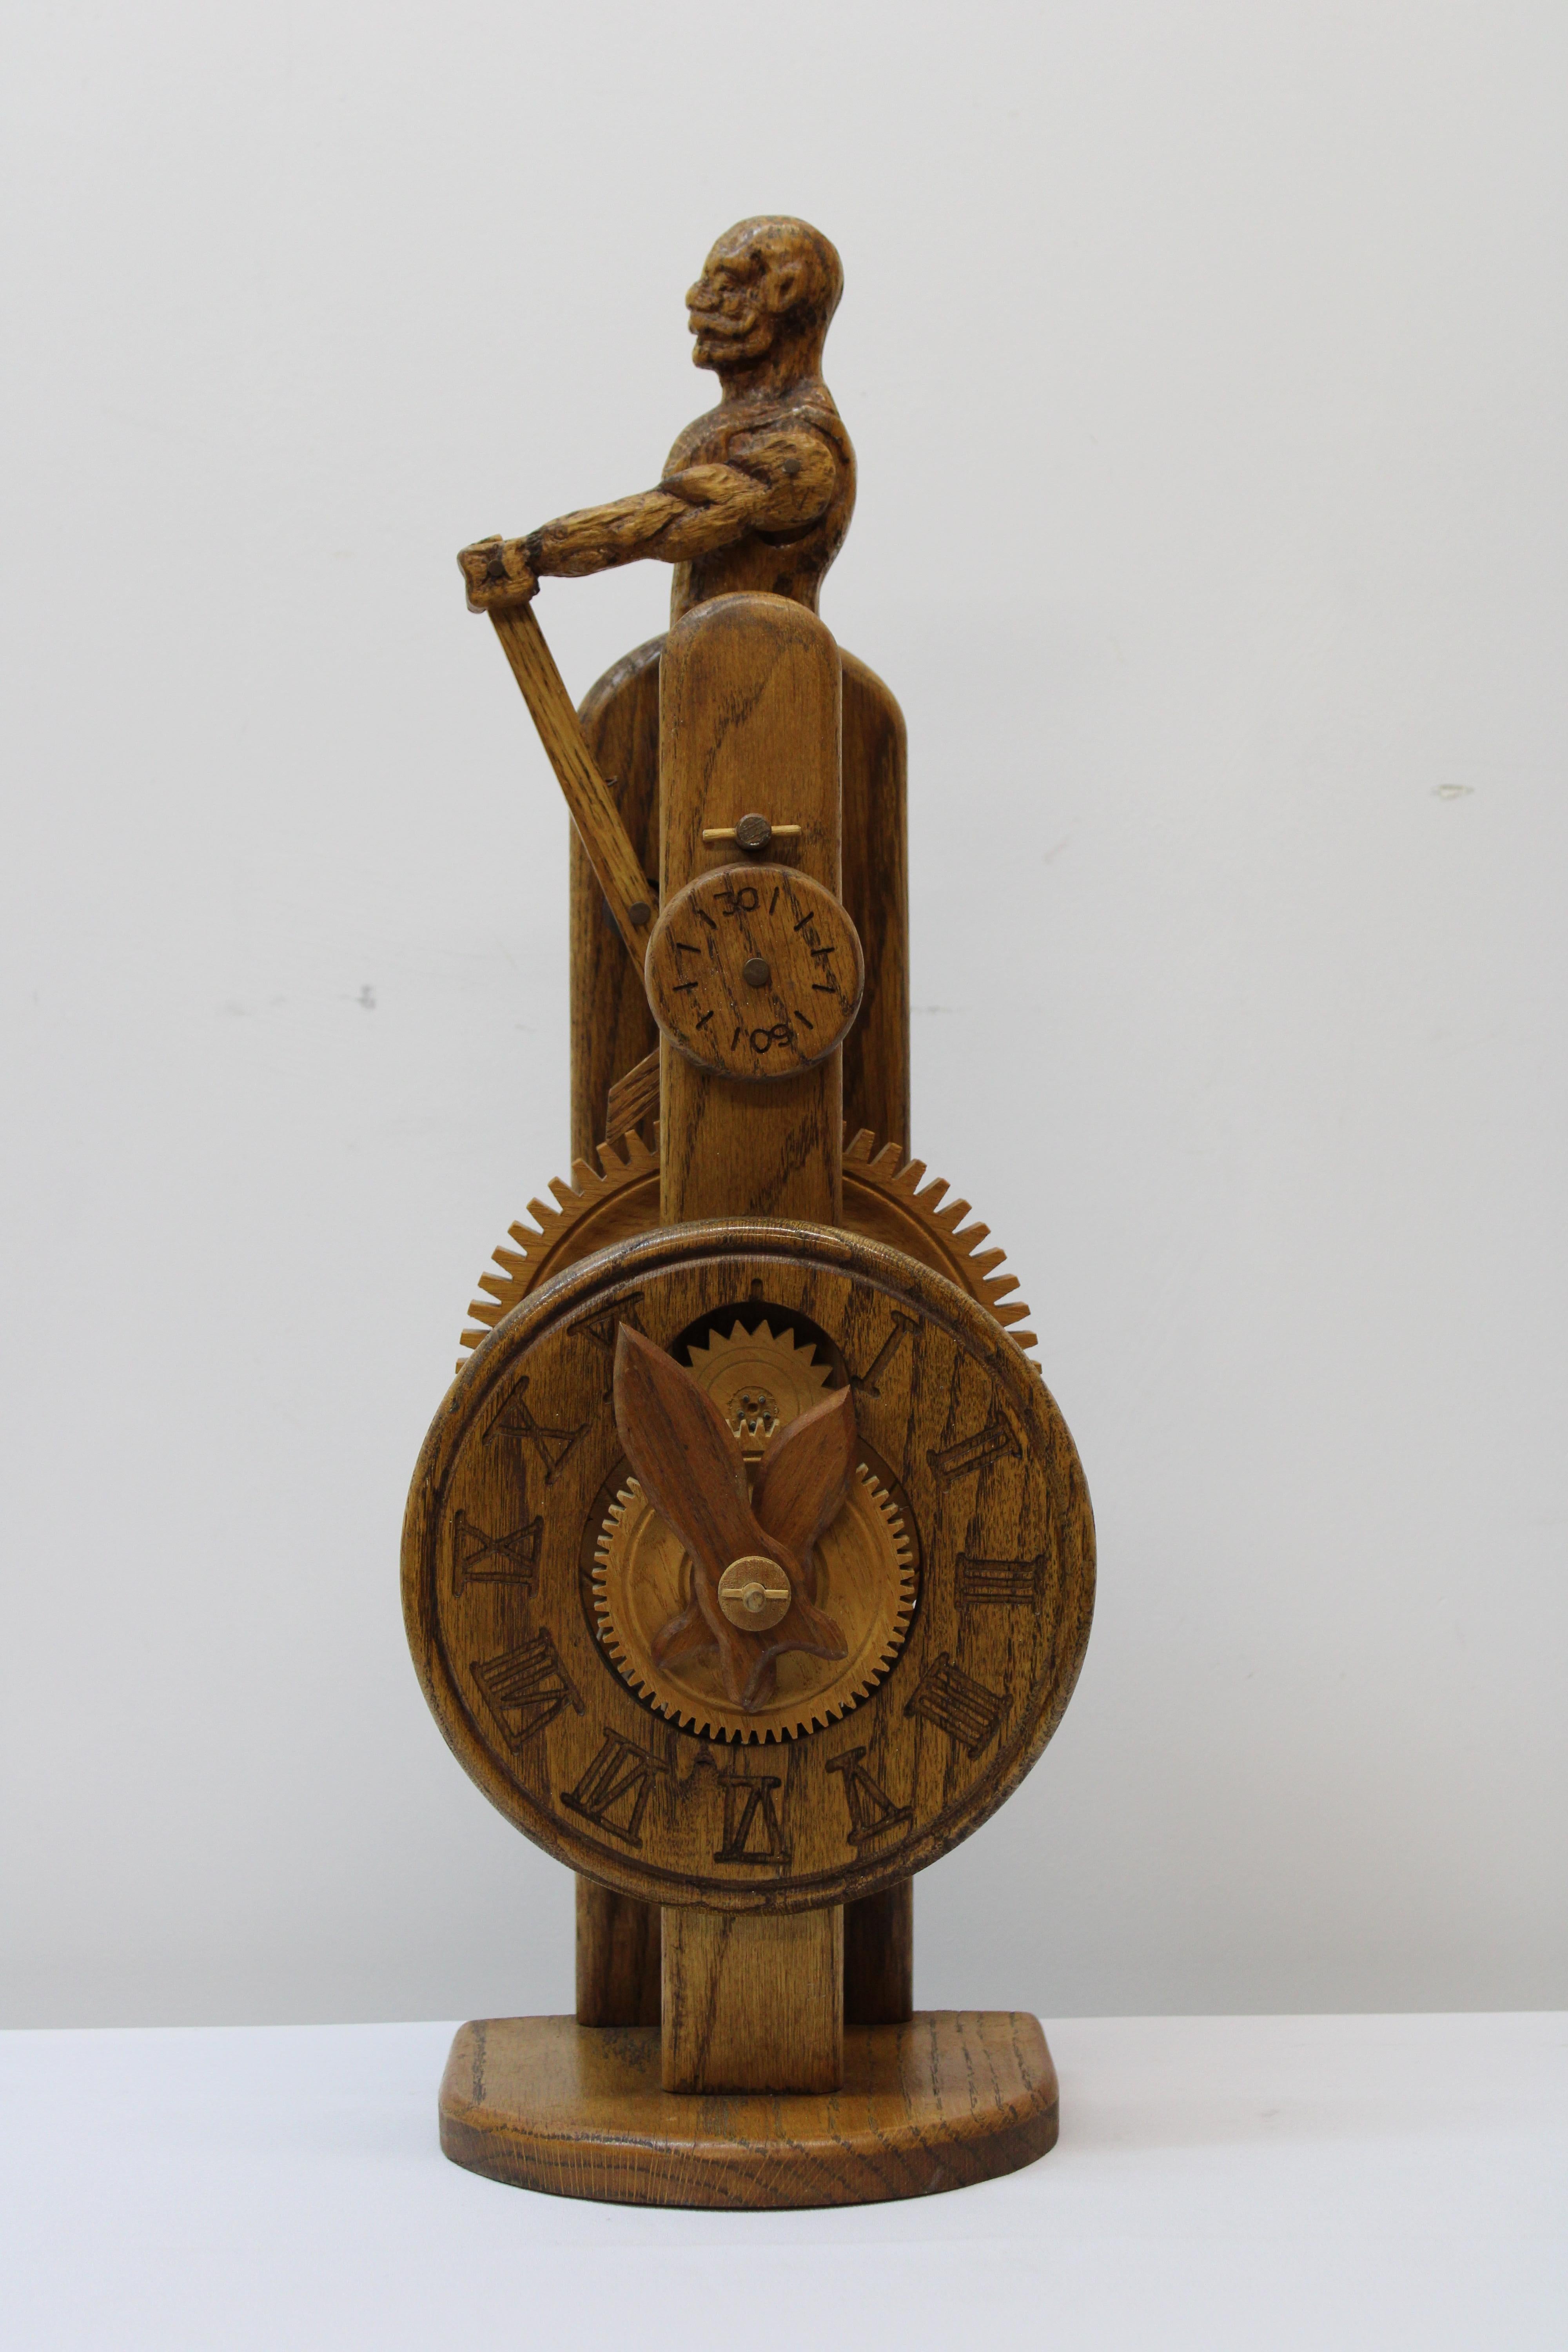 C. Late 20th Century

Hand carved wood clock w/ wooden 

Gears By Enchanted Woods
Motor Made By Synchron.